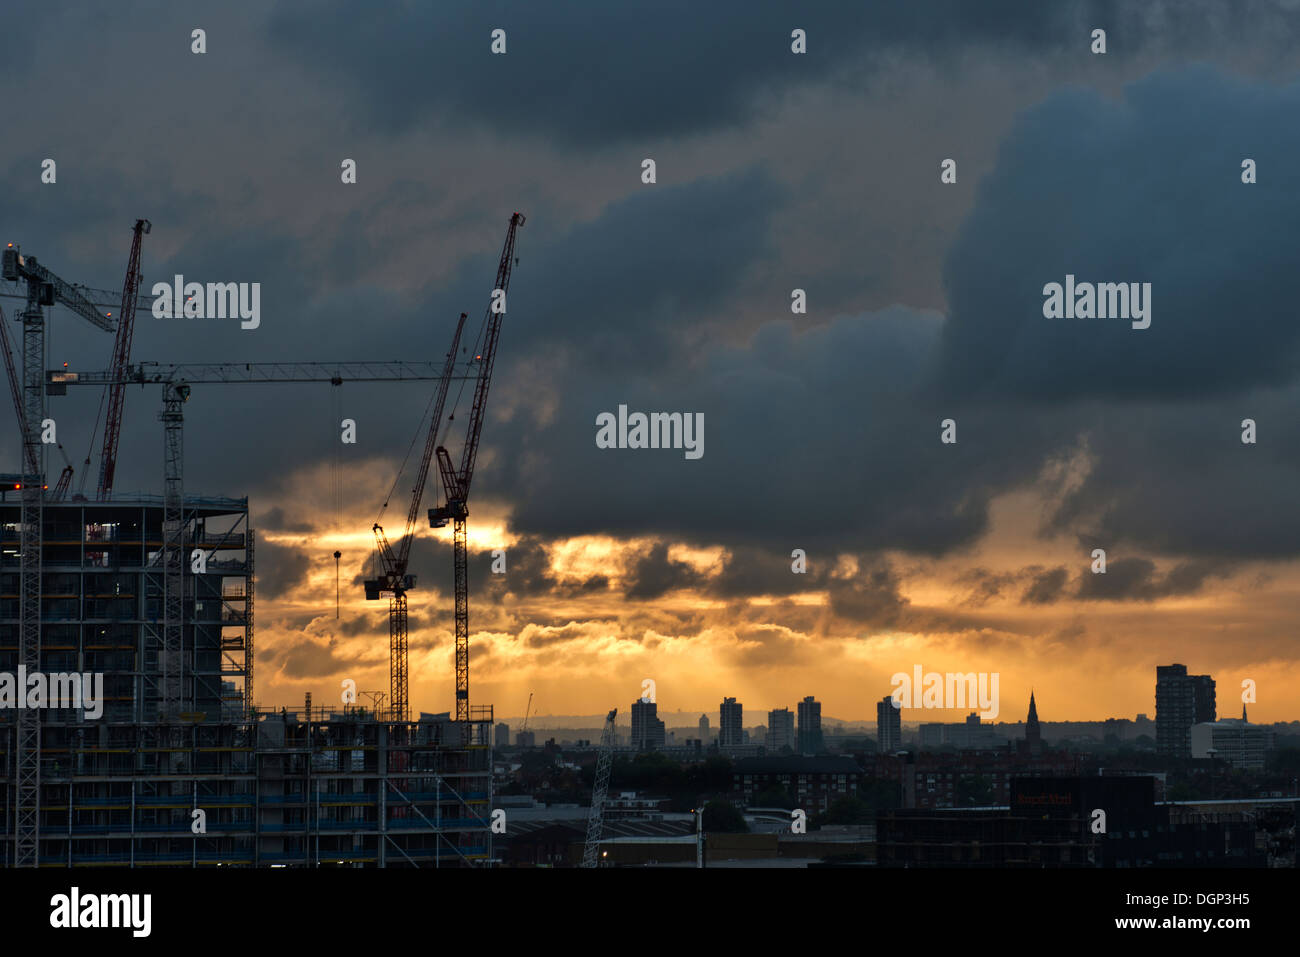 The ever changing London skyline, image taken on top of Battersea Power Station's roof as dawn was breaking. Stock Photo